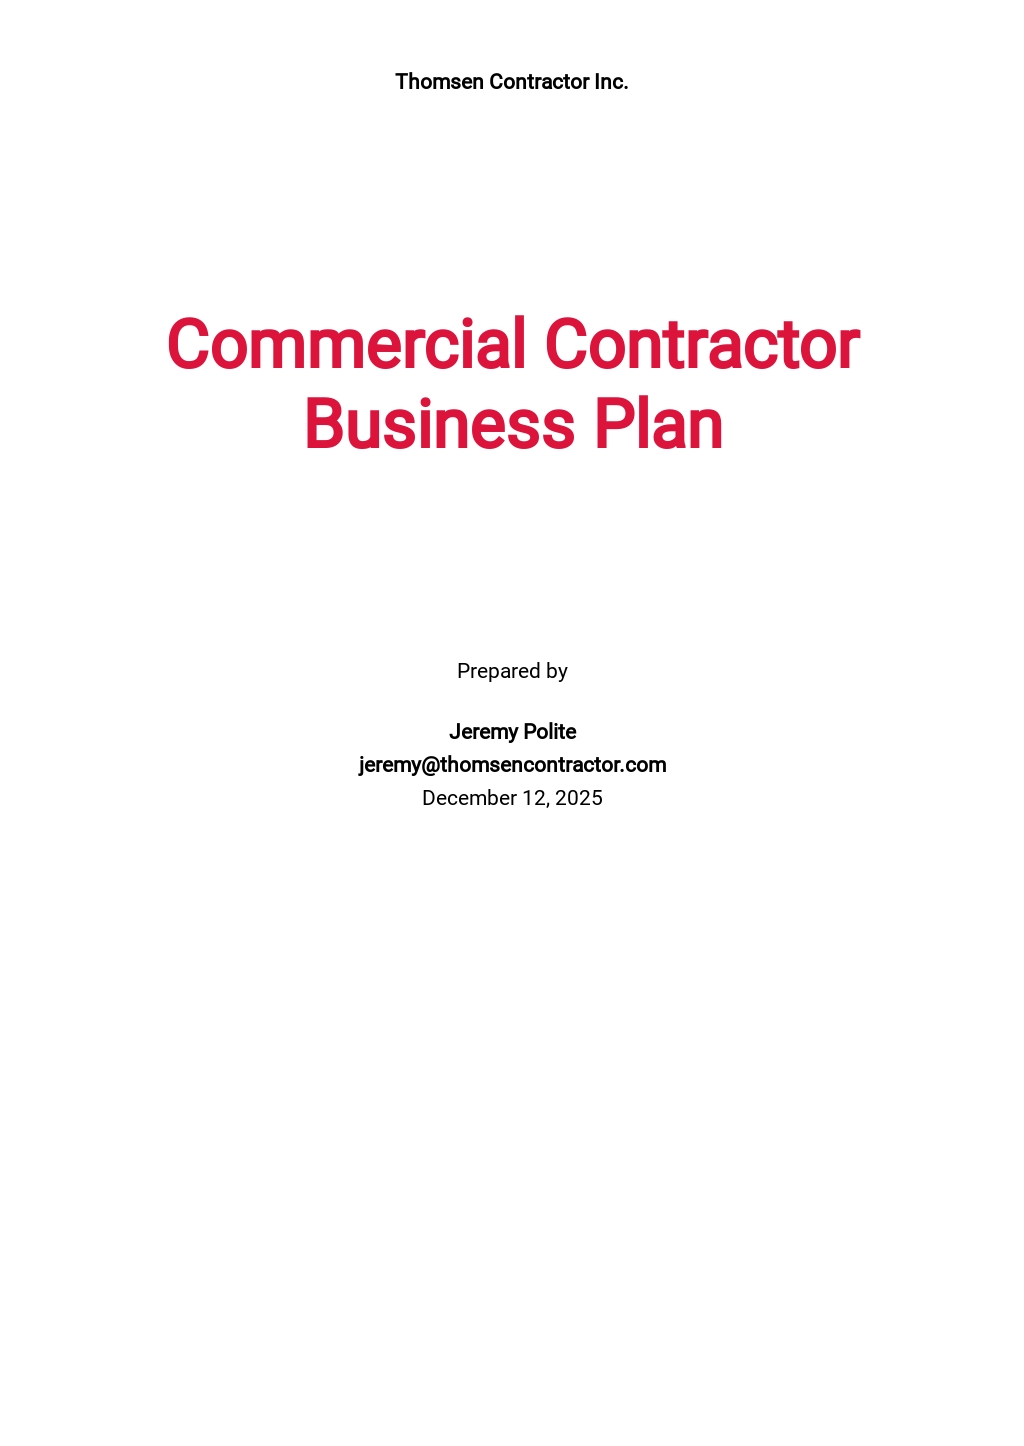 telecommunications contractor business plan